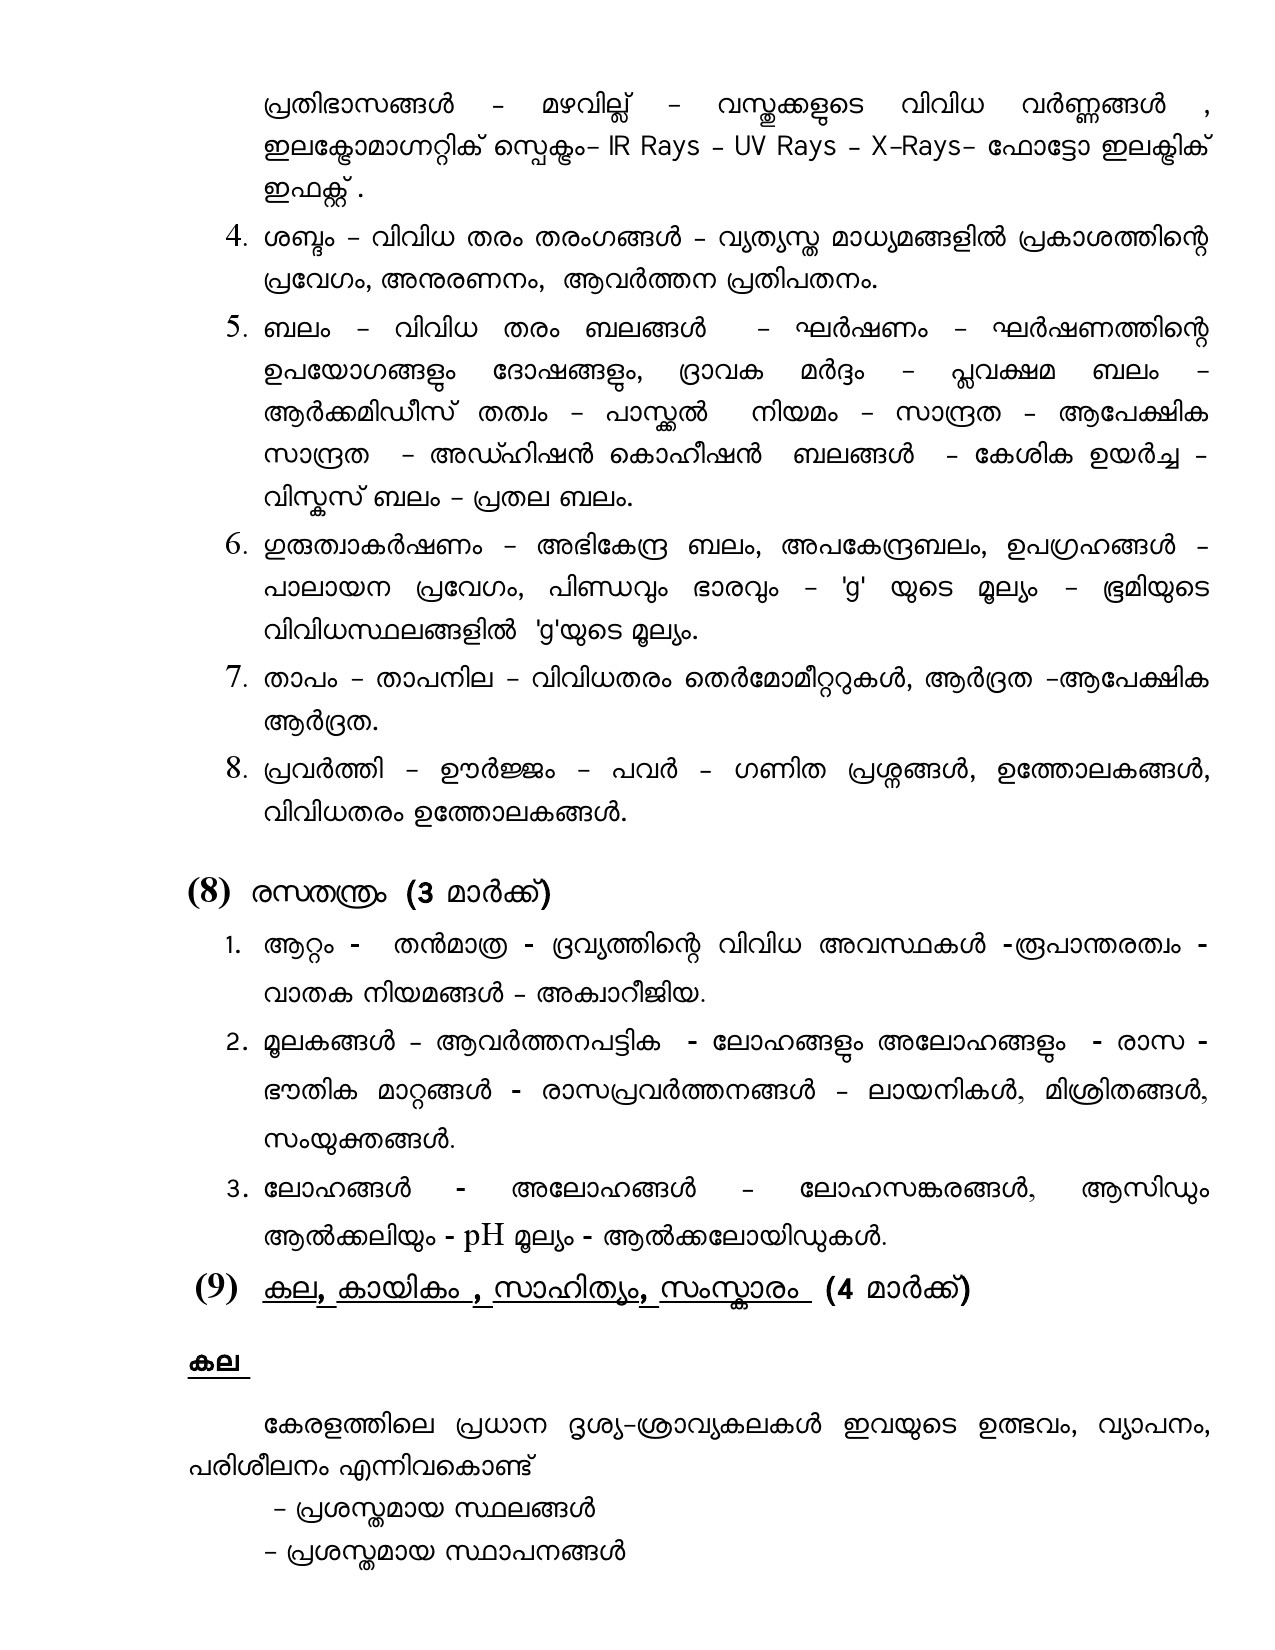 Civil Excise Officer Final Examination Syllabus For Plus Two Level - Notification Image 5